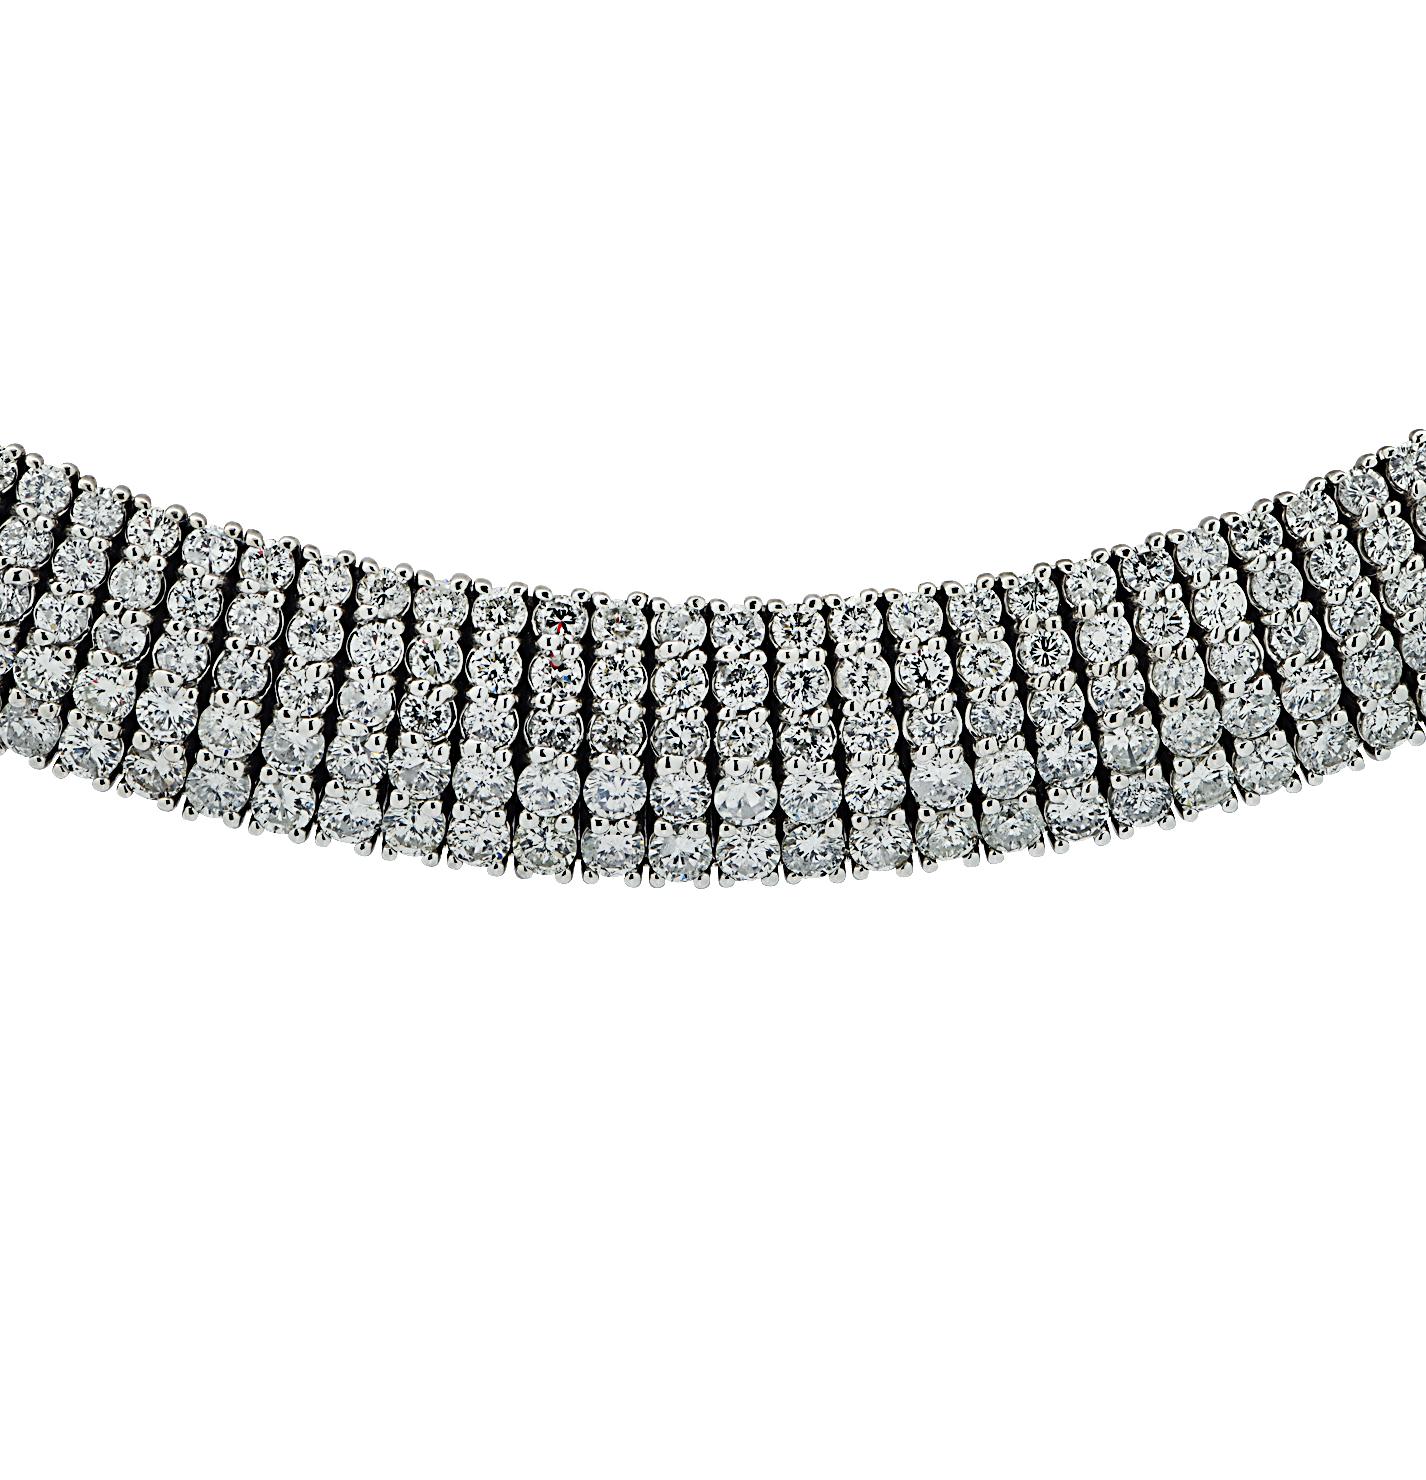 Sensational Choker necklace crafted in white gold, featuring 854 round brilliant cut diamonds weighing approximately 34 carats total, G-H color SI clarity. Five rows of round brilliant cut diamonds sweep around the neck, creating a spectacular